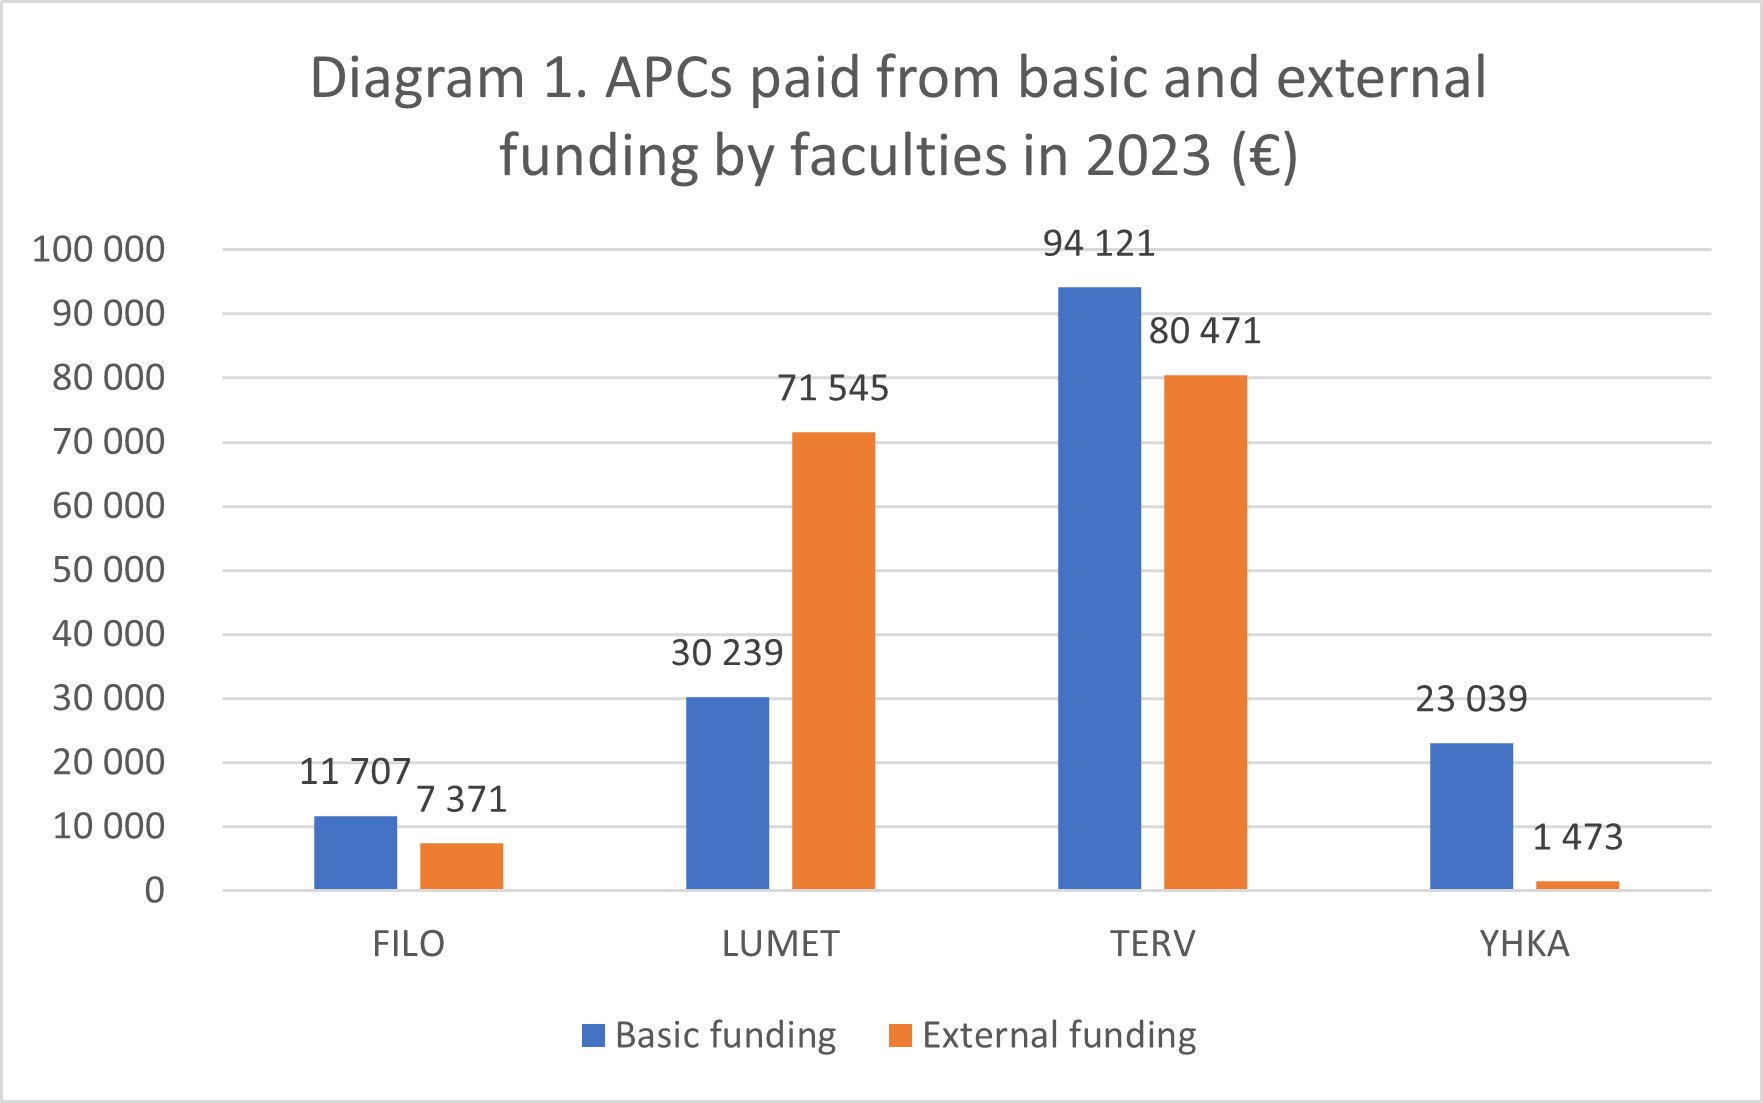 Diagram: philosophical faculty: basic funding 11707 euros, external funding 7371 euros, faculty of science, forestry and technology: basic funding 30239 euros, external funding 71545 euros, faculty of health sciences: basic funding 94121 euros, external funding 80471 euros, faculty of social sciences and business studies: basic funding 23039 euros, external funding 1473 euros.